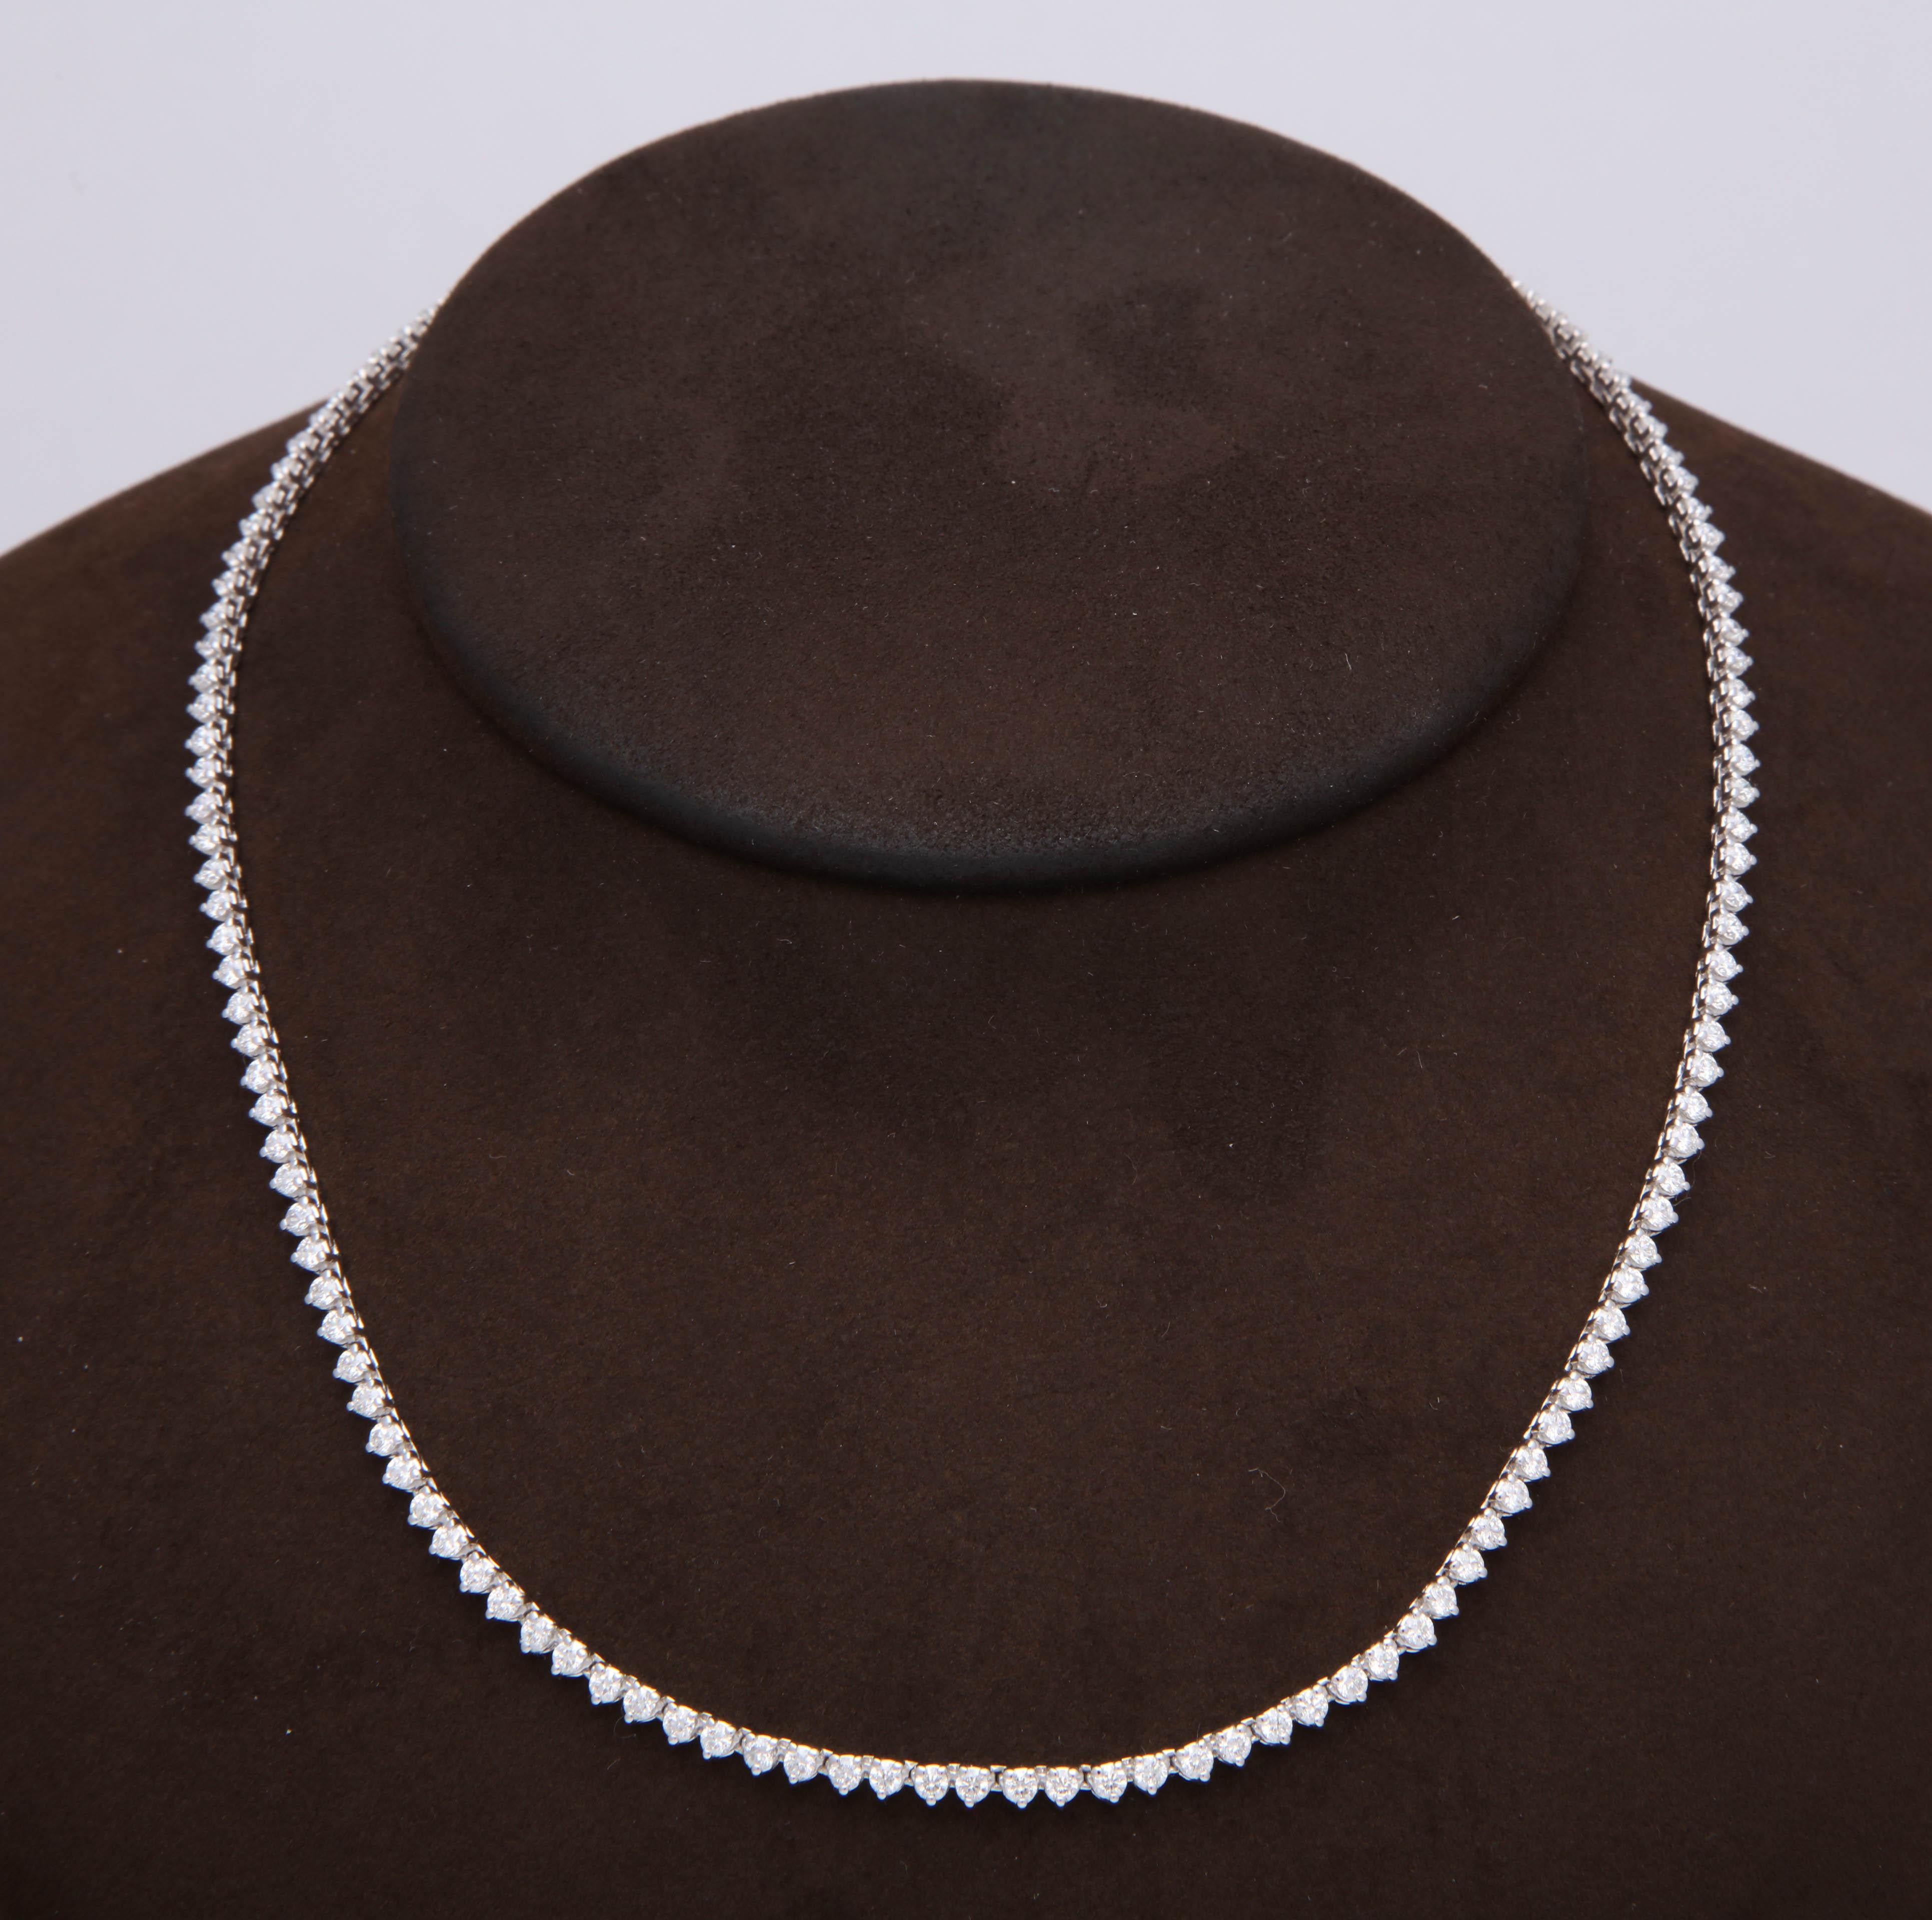 

5.69 carats of white round brilliant cut diamonds set in 14k white gold

A perfect choker necklace that can be worn daily and casually or dressed up. 

Looks great layered with other pieces as well!

16 inch length, can be ordered longer or